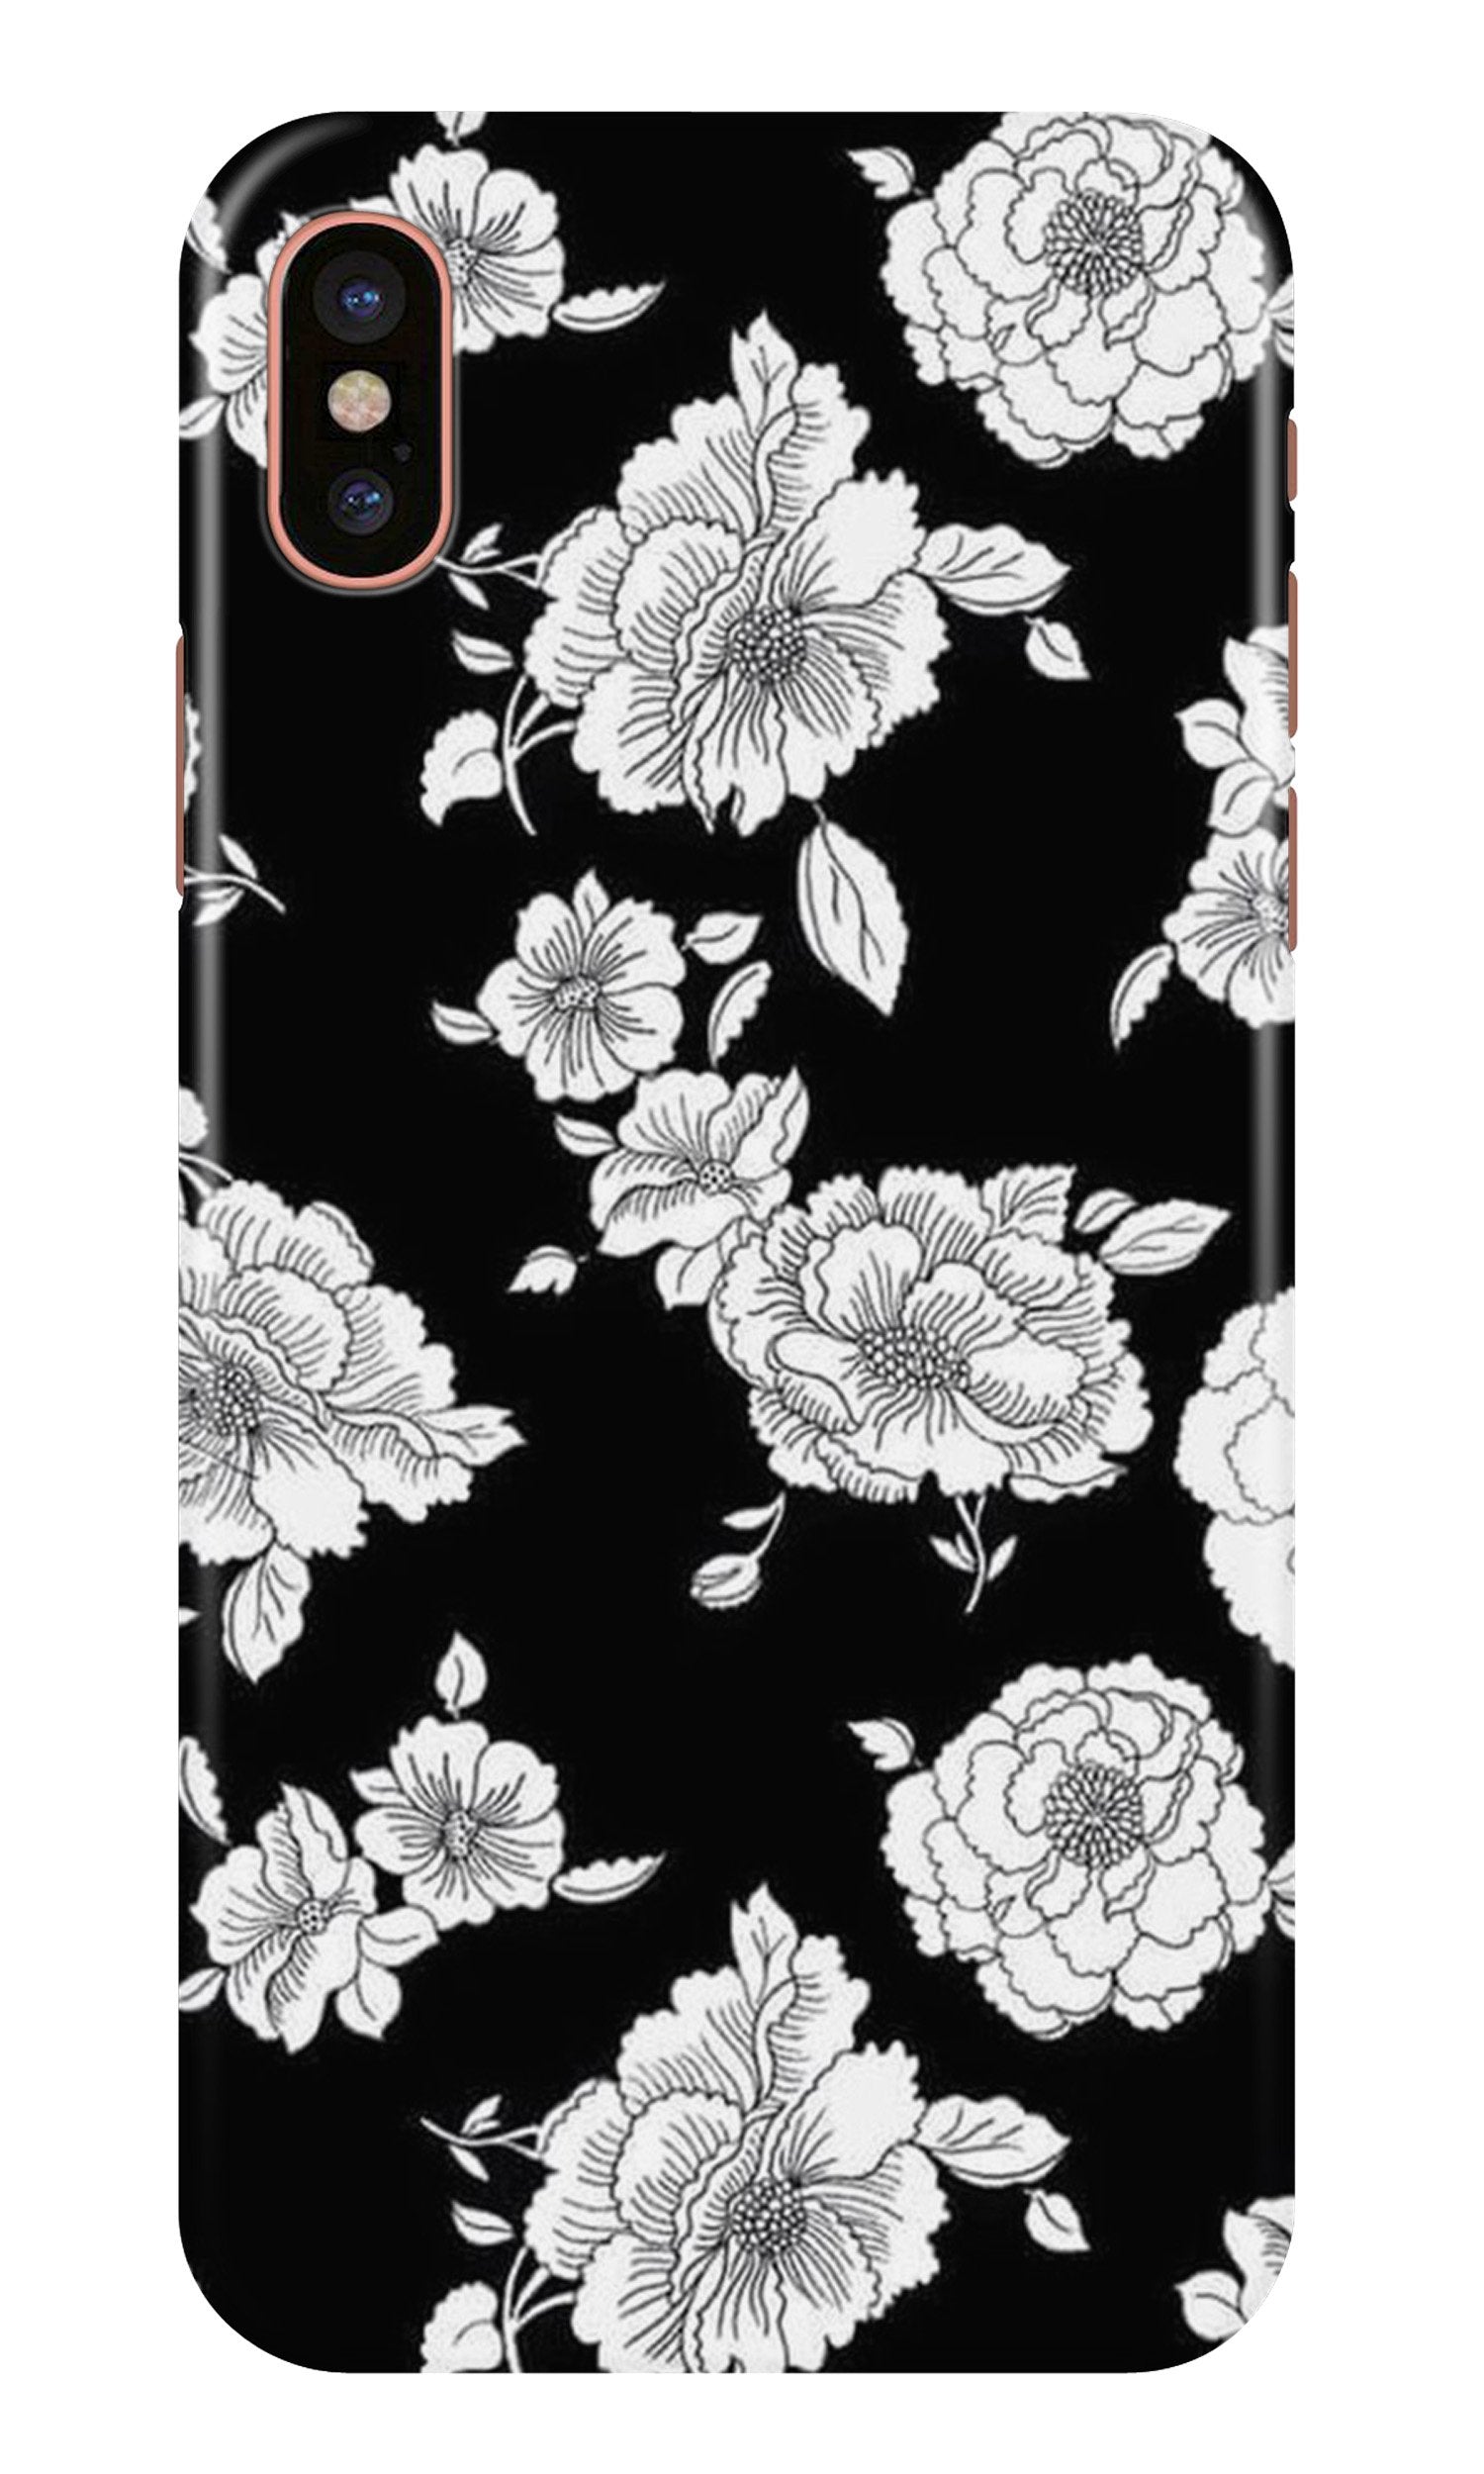 White flowers Black Background Case for iPhone X